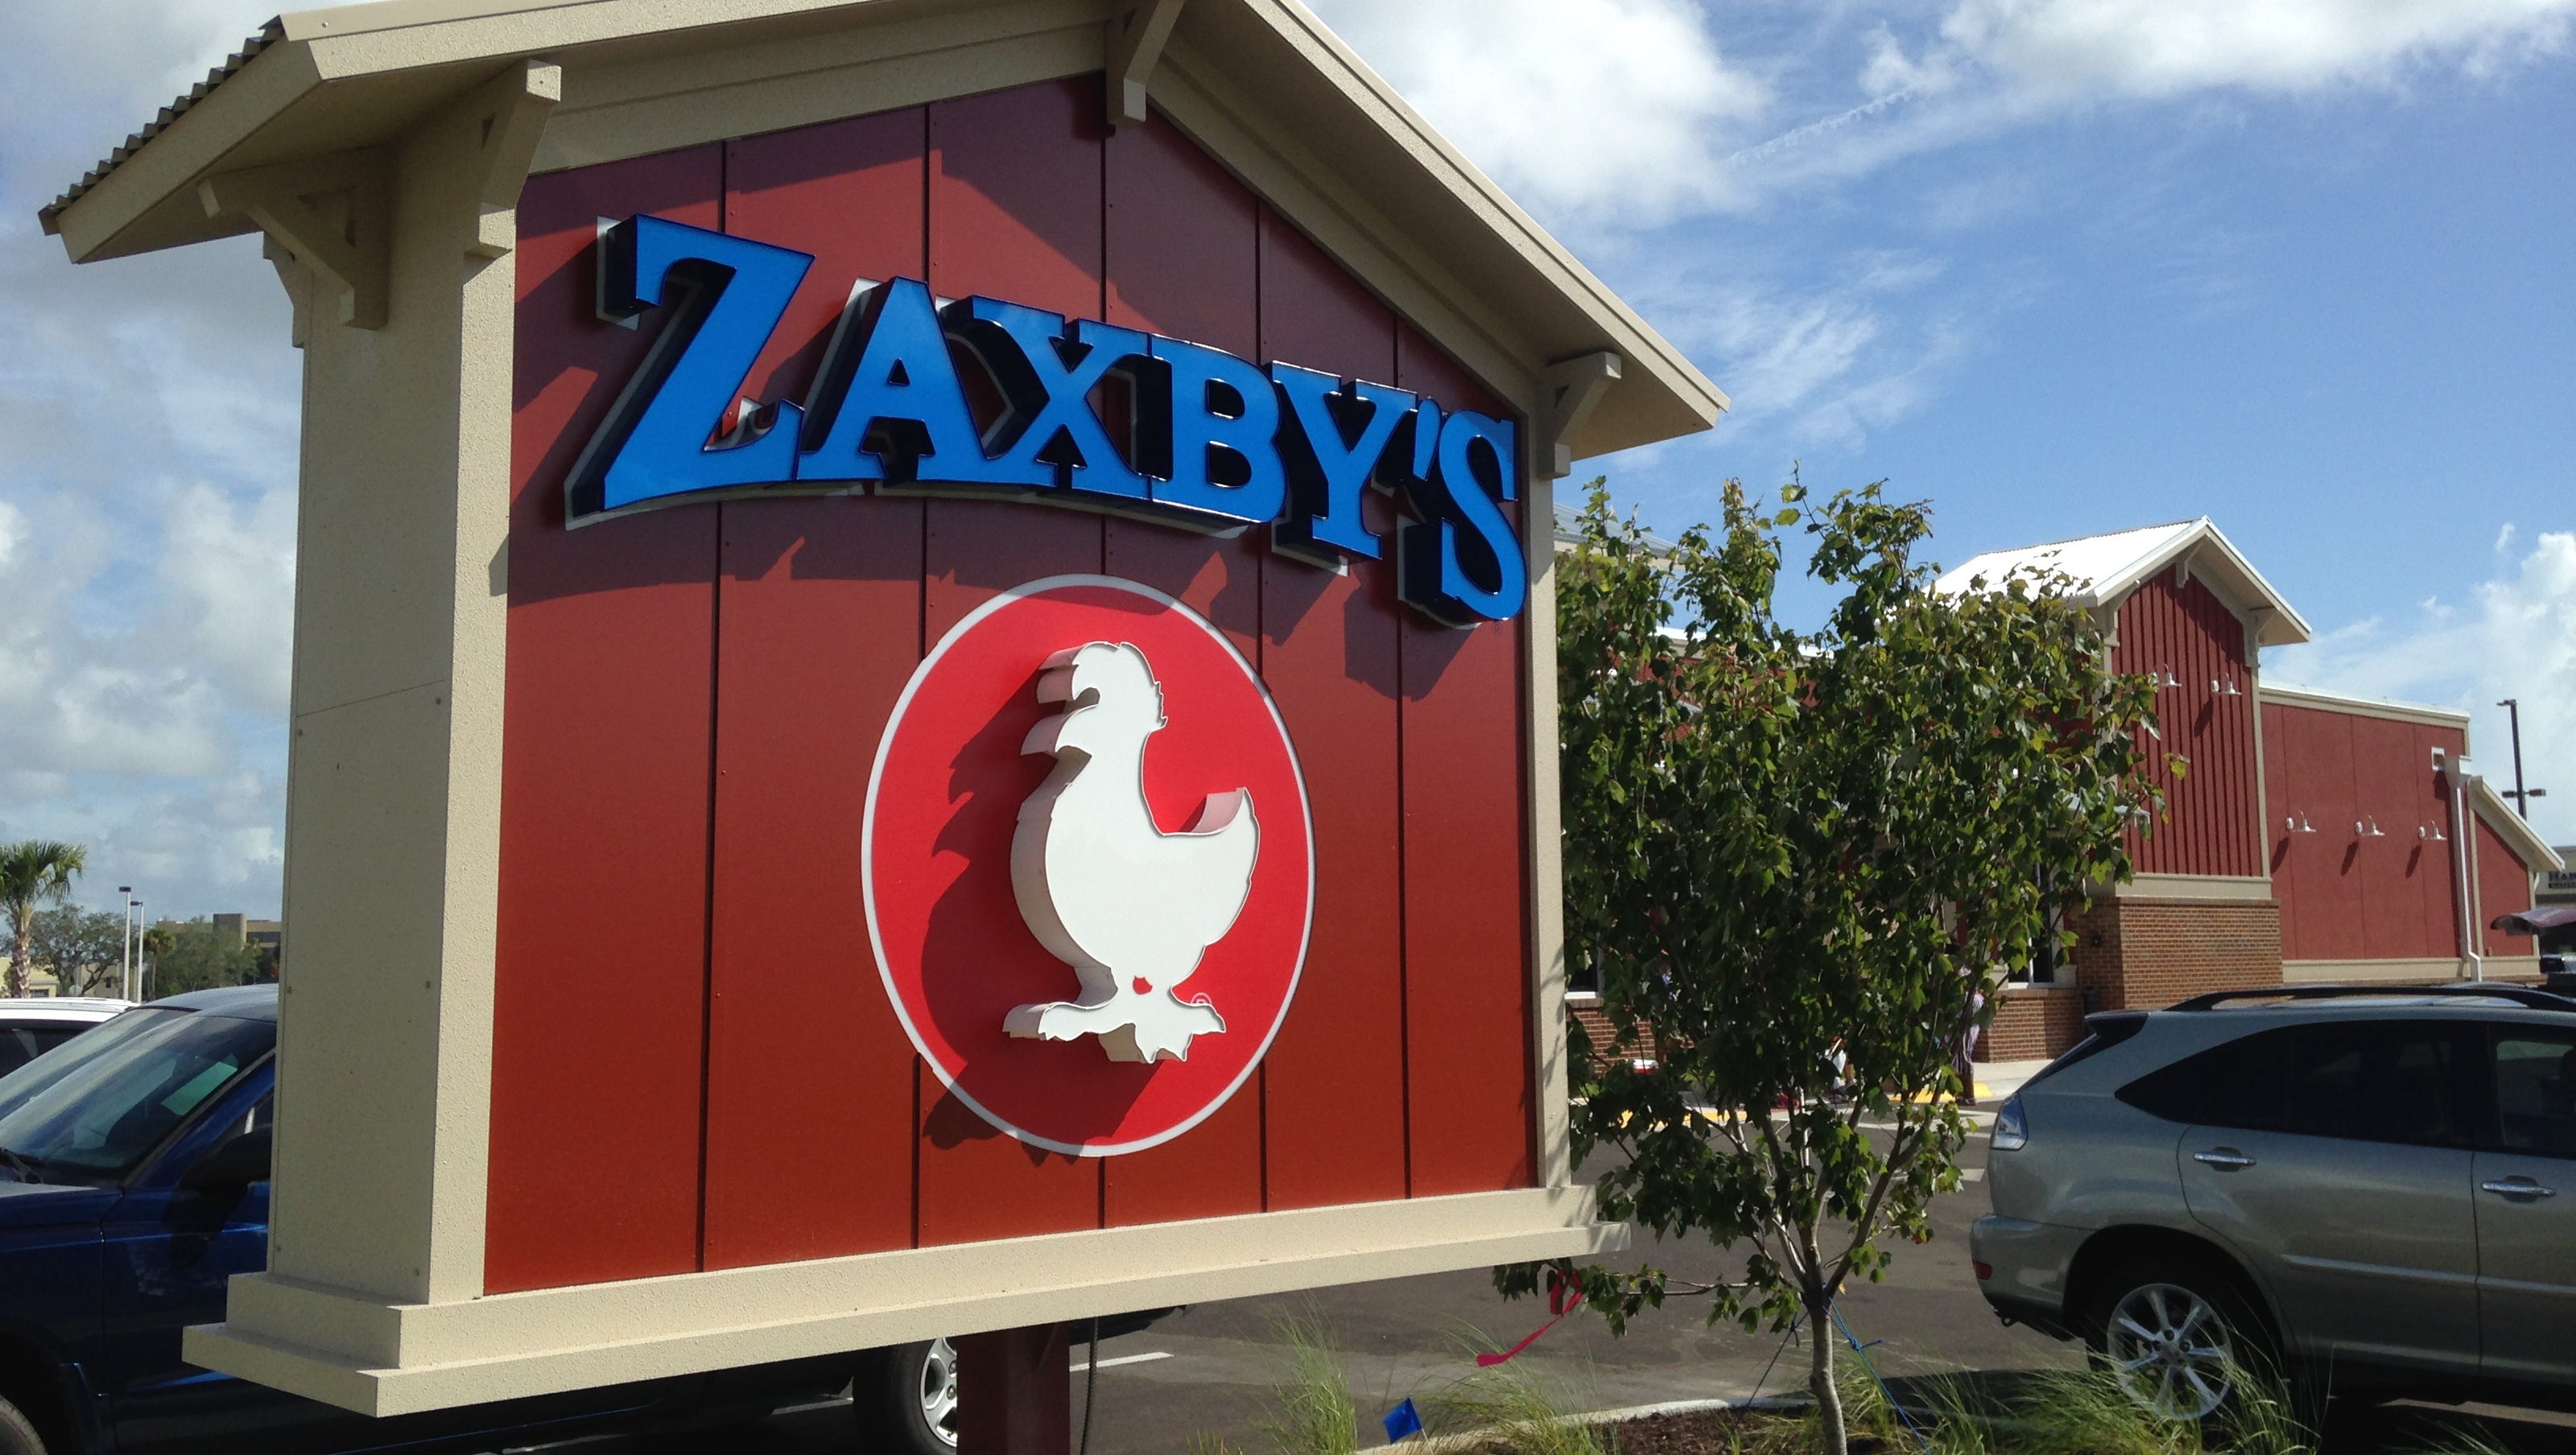 BDB: I spy a Zaxby's, Brevard's 7th car chase of the year and a bunch